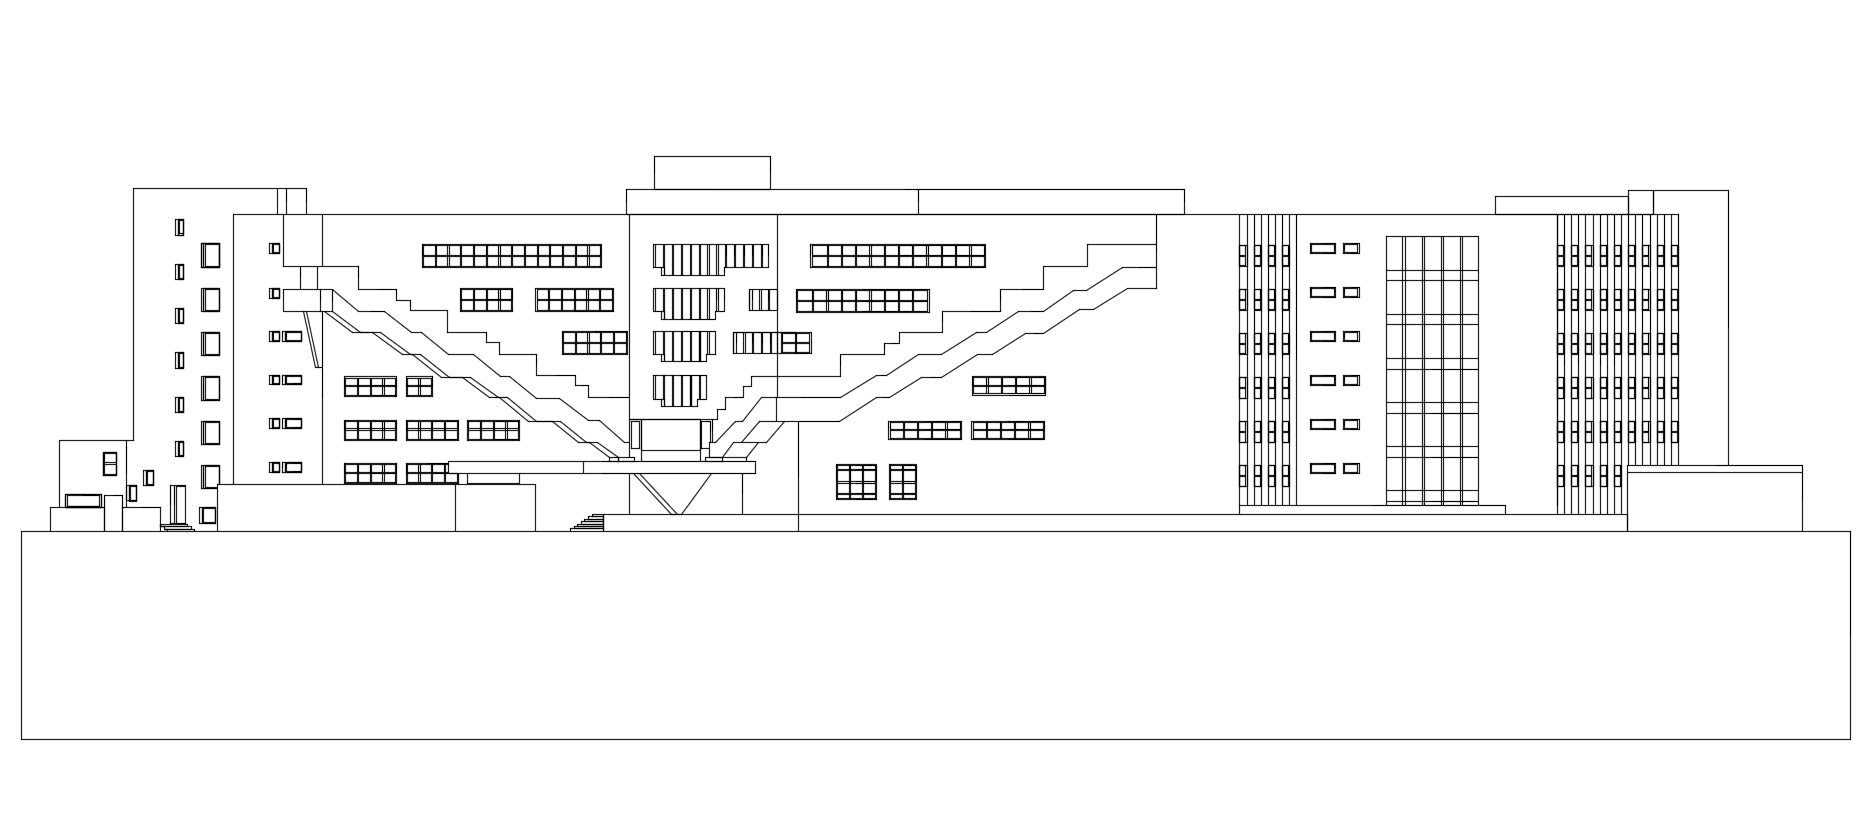 【Famous Architecture Project】MIT Baker-Alvar Aalto-Architectural CAD Drawings